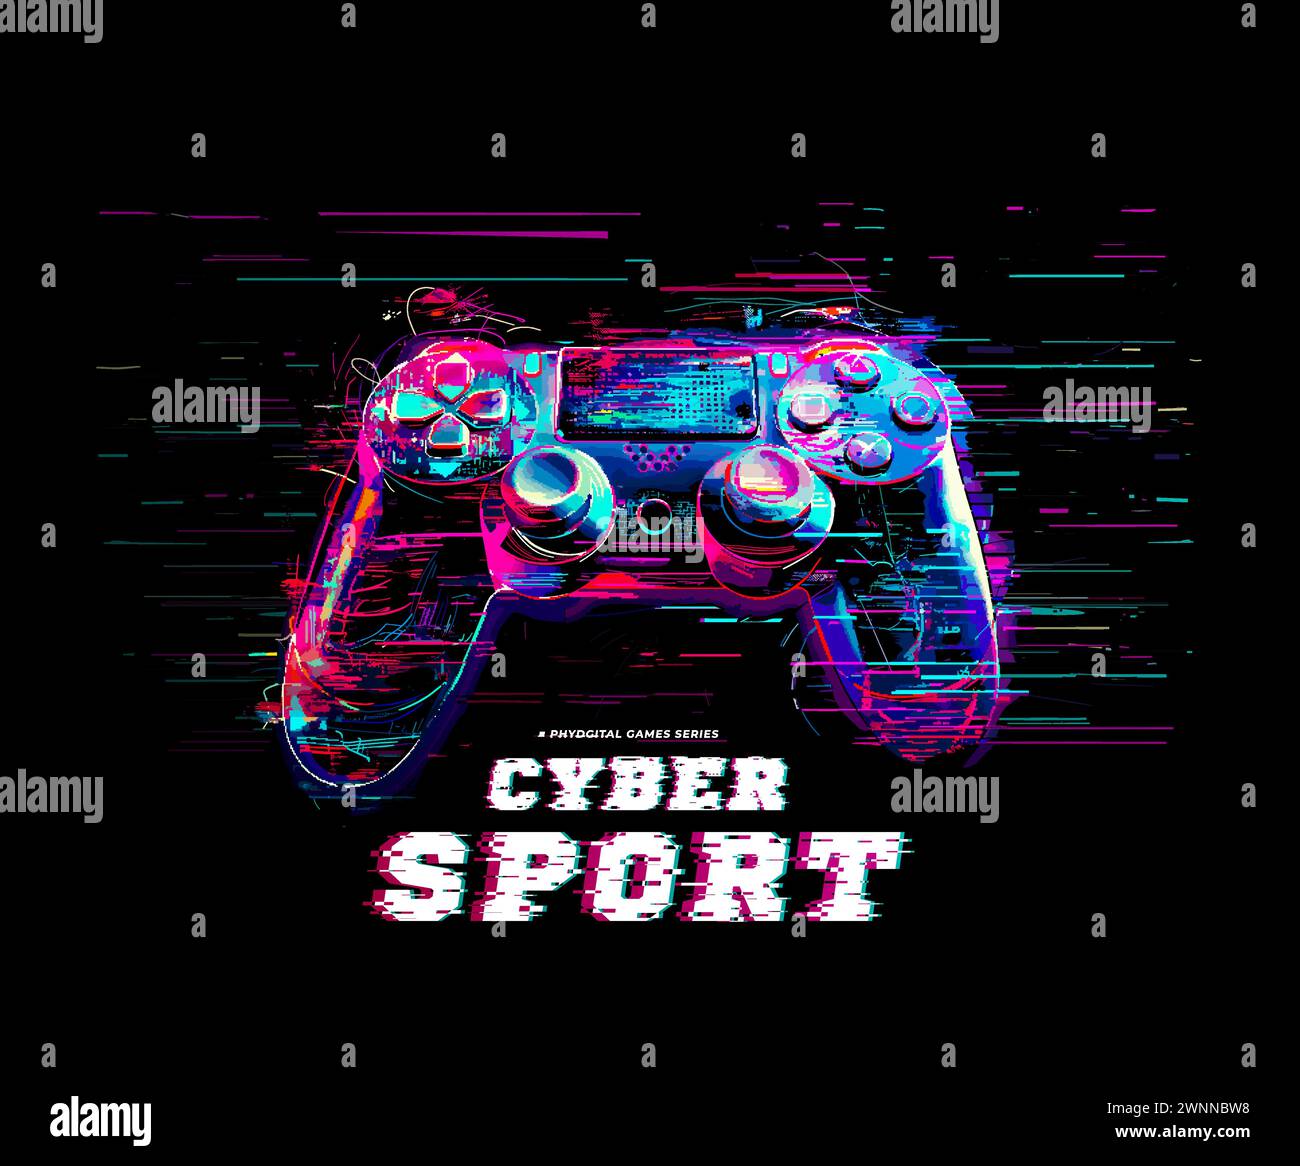 Cybersport keypad with glitch effects. Vector illustration. T-shirt design Stock Vector